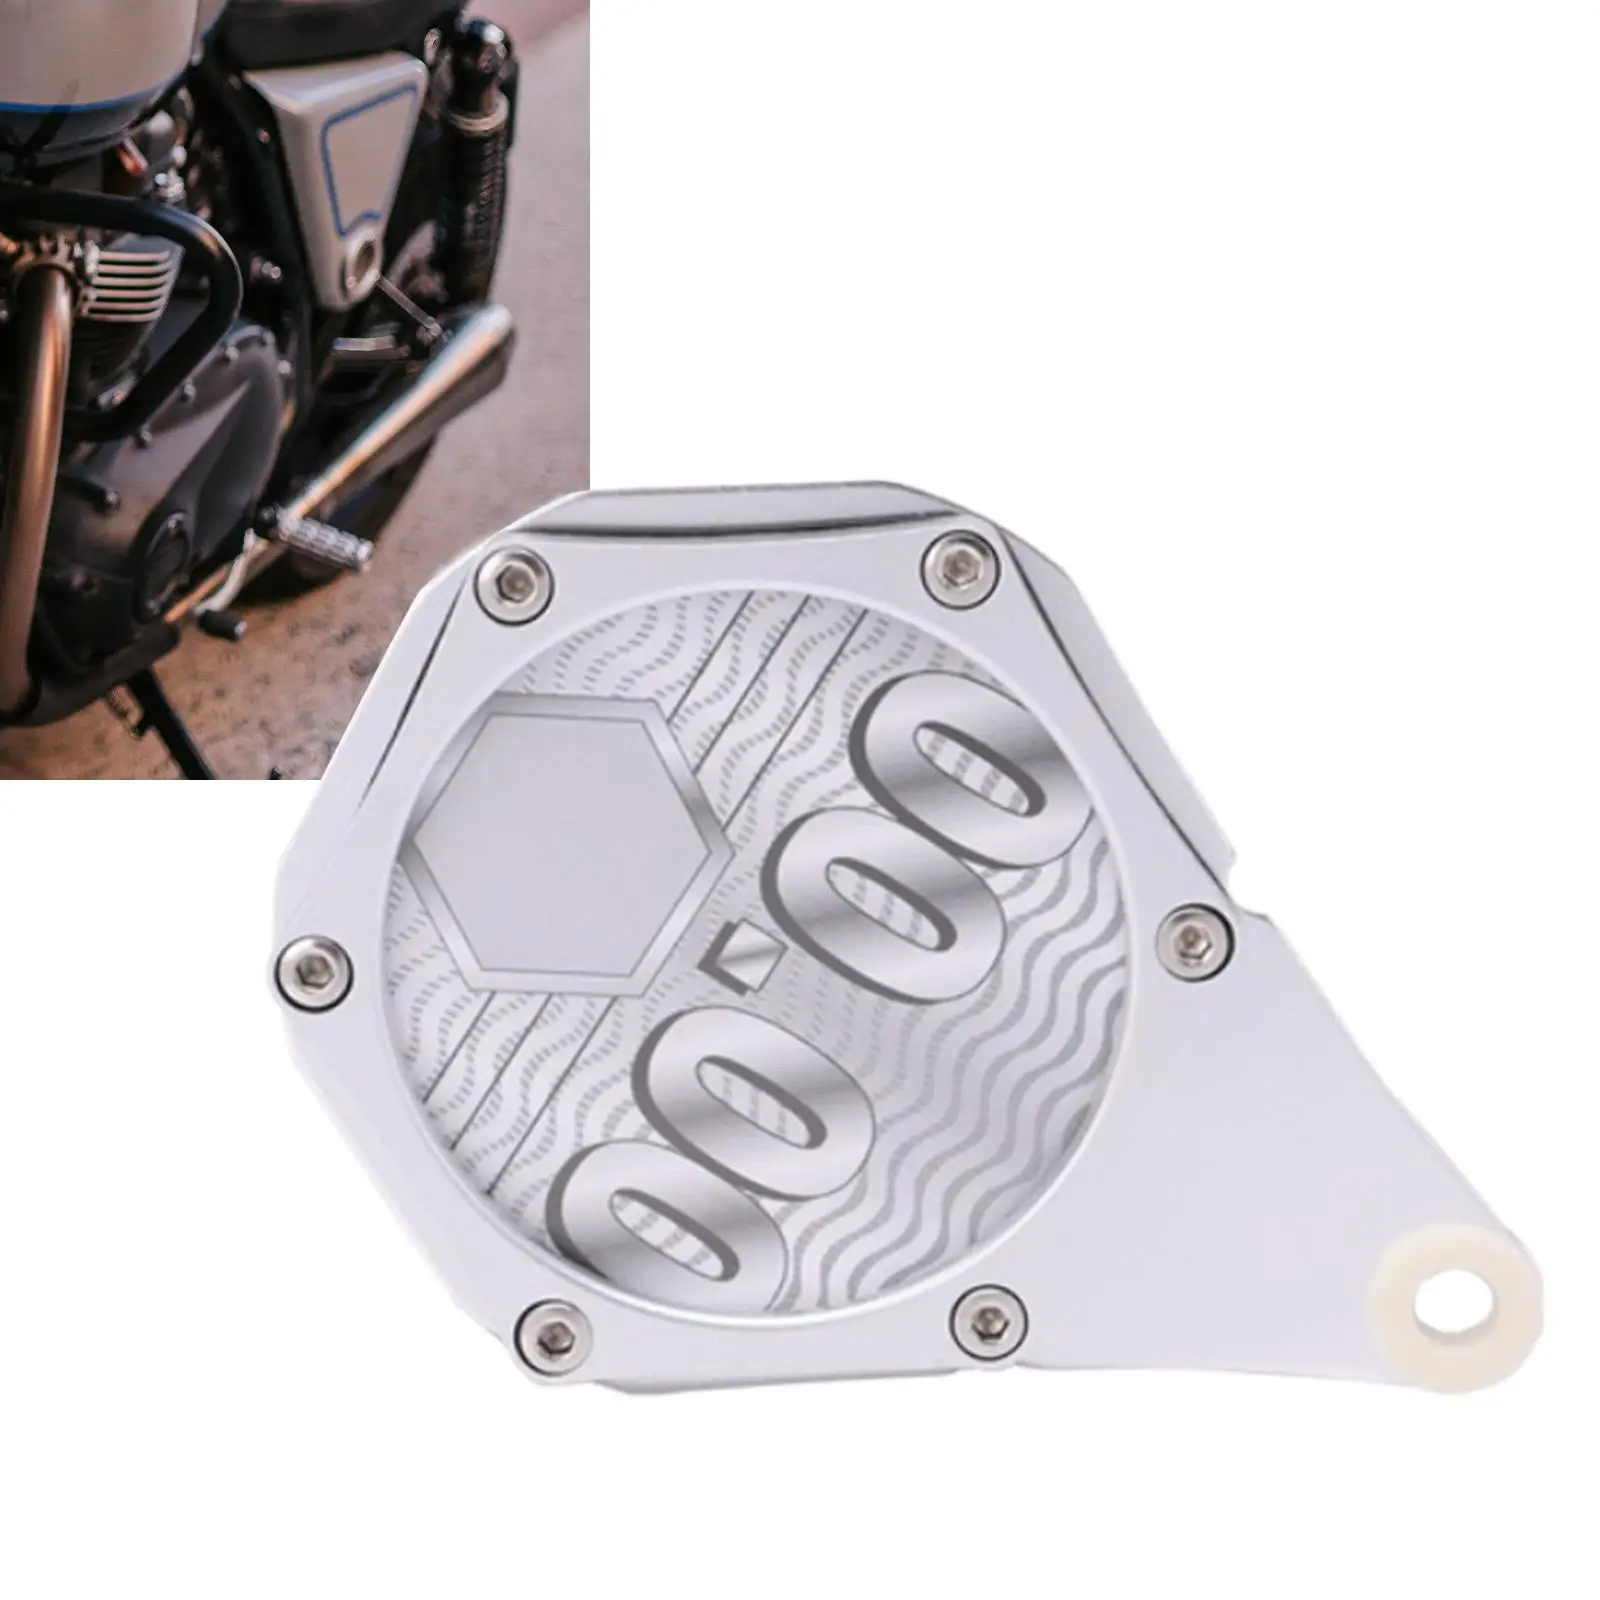 Tax Disc Plate Motorbike Tax Disc Holder for Motorcycle Easy to Install